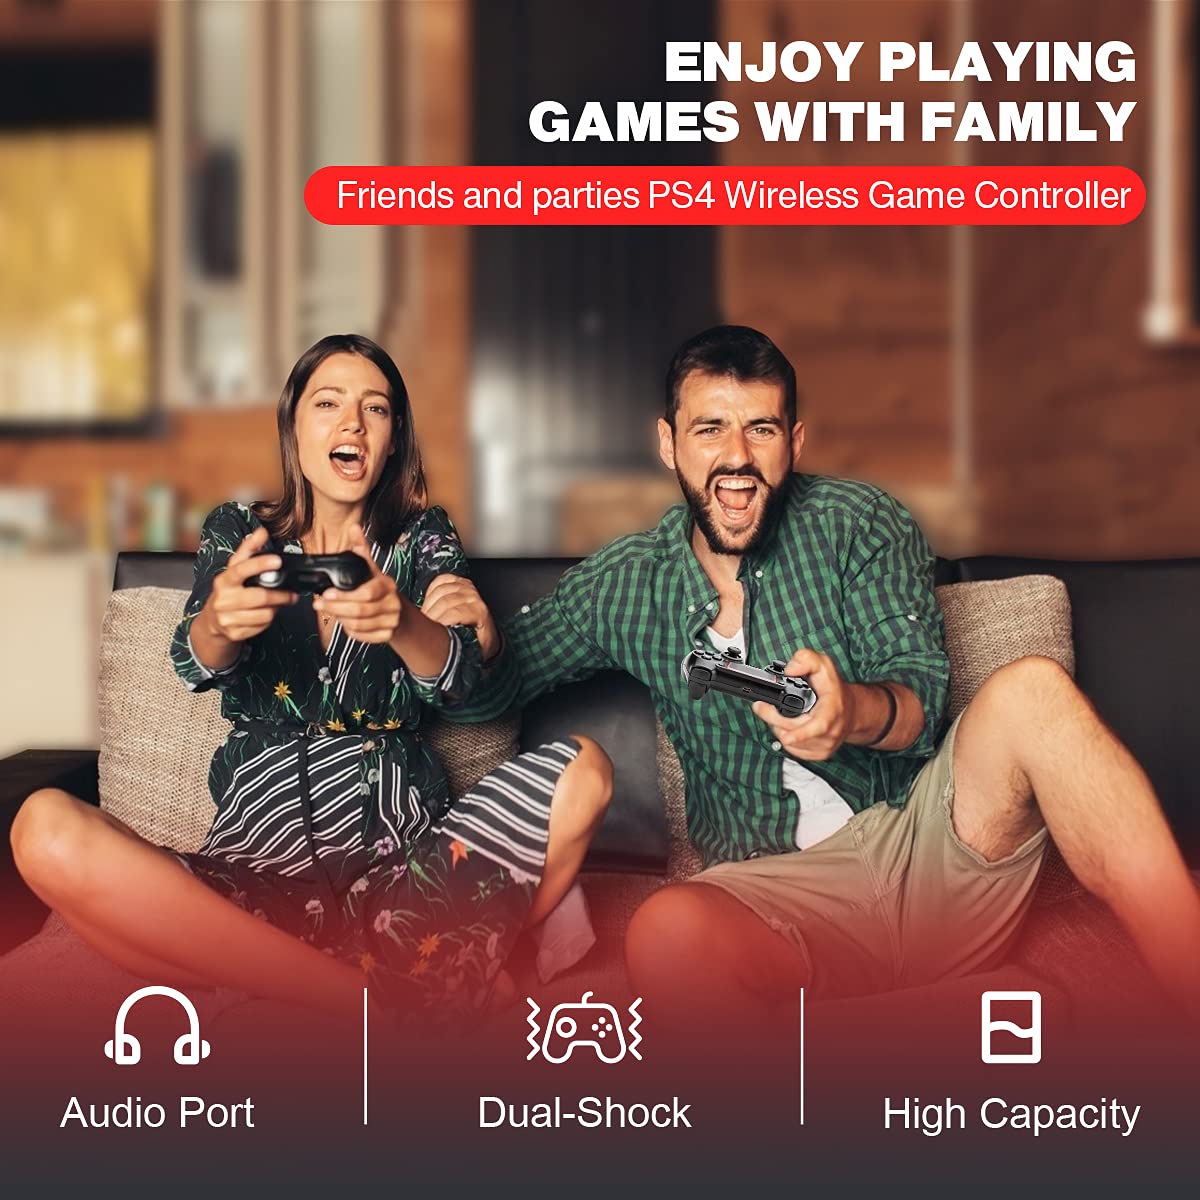 VidPPluing Wireless Controller for PS4/Pro/Slim Consoles, Game Remote Controller with 6-Axis Motion Sensor/Audio Function/Charging Cable-Red